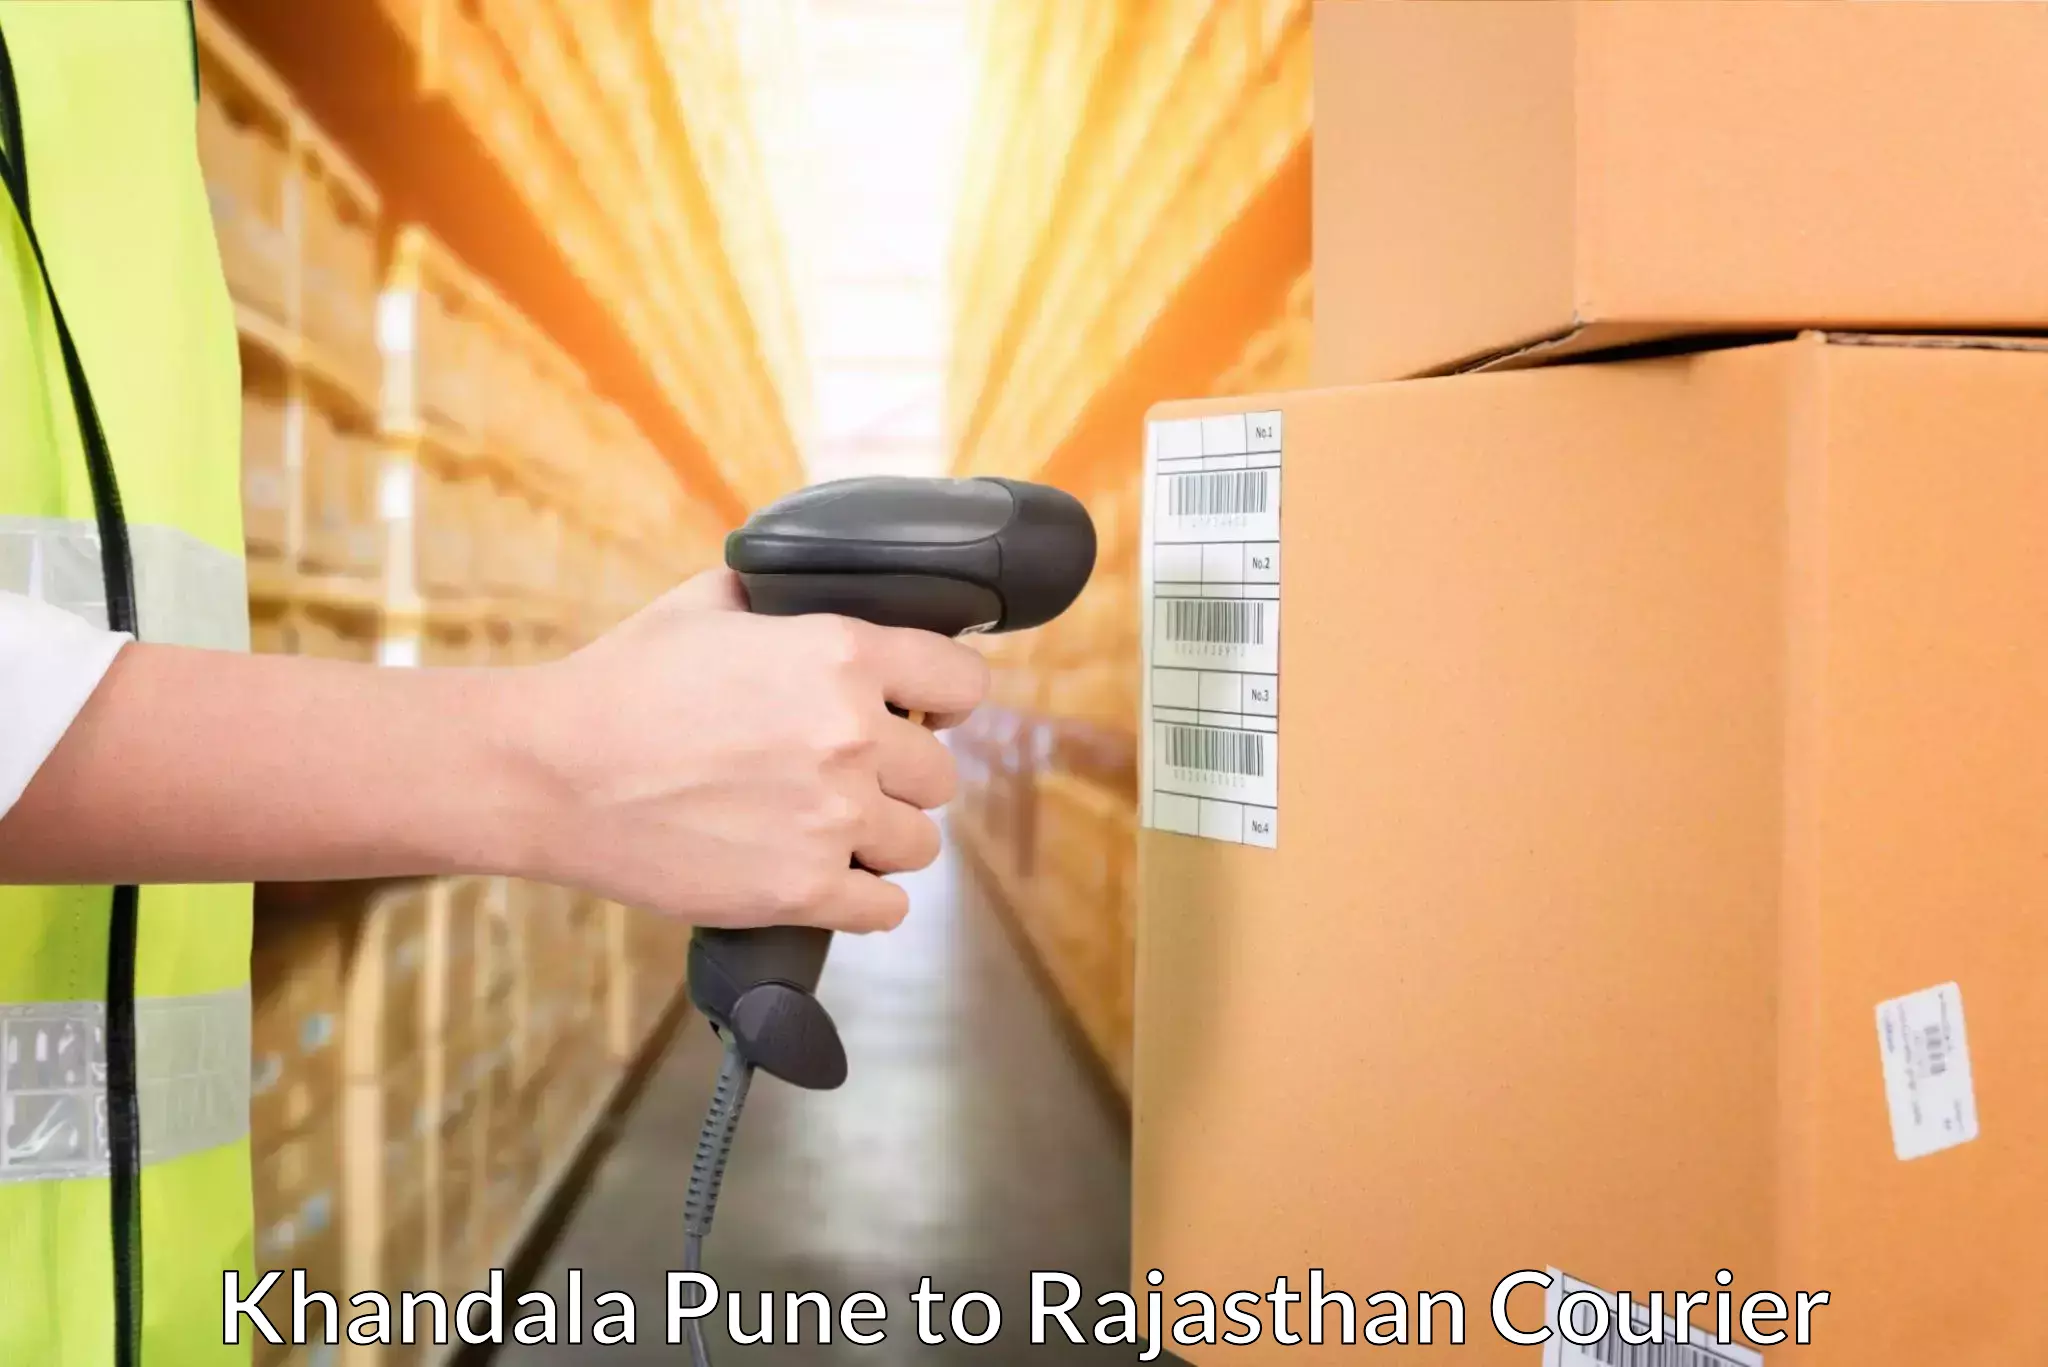 Courier tracking online Khandala Pune to Rajsamand